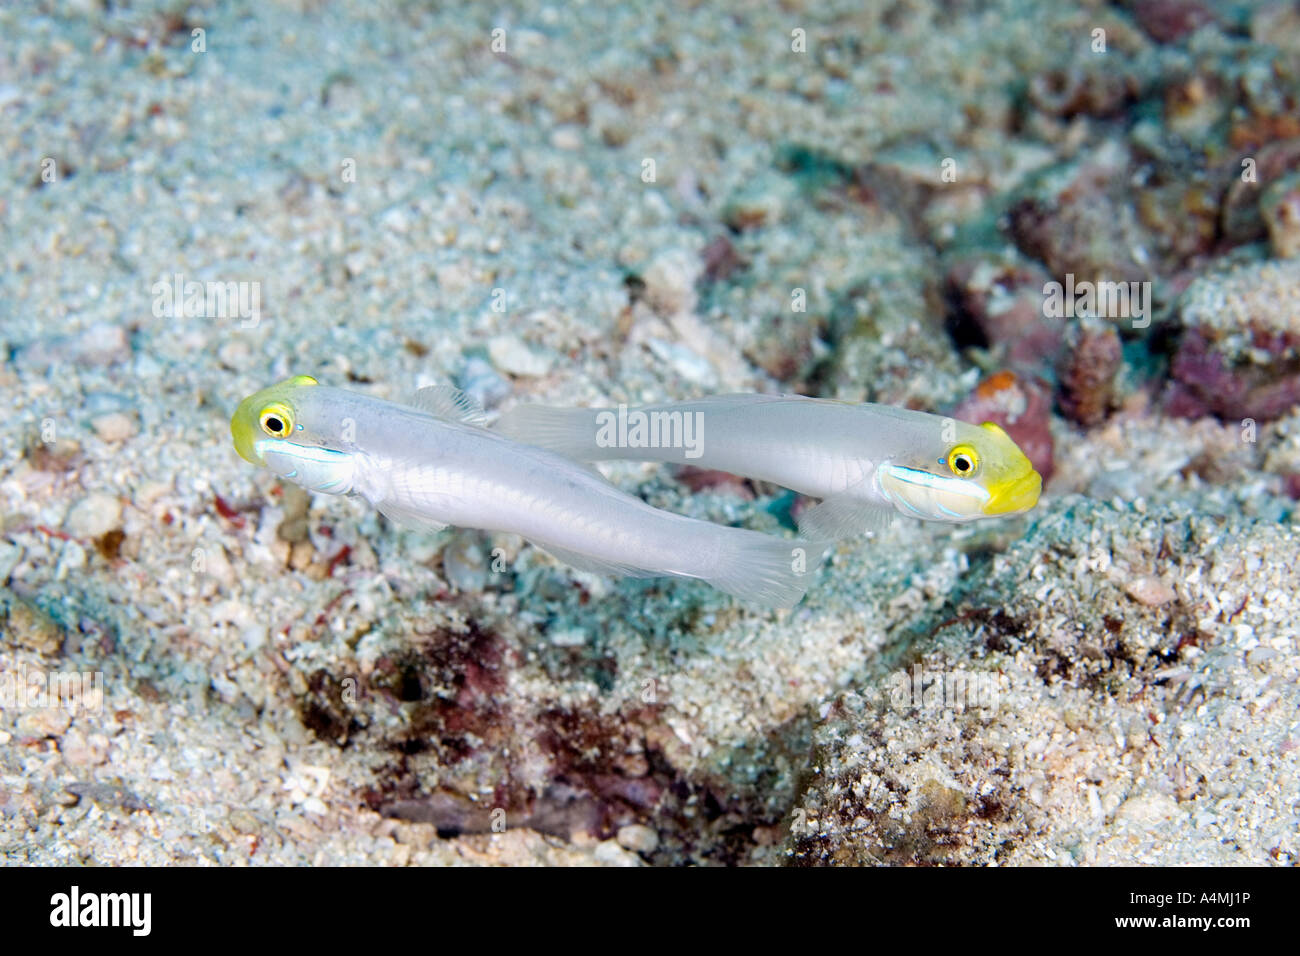 A pair of Golden Headed Sleeper Gobies,  Valenciennea strigata also known as Blueband Goby. Stock Photo